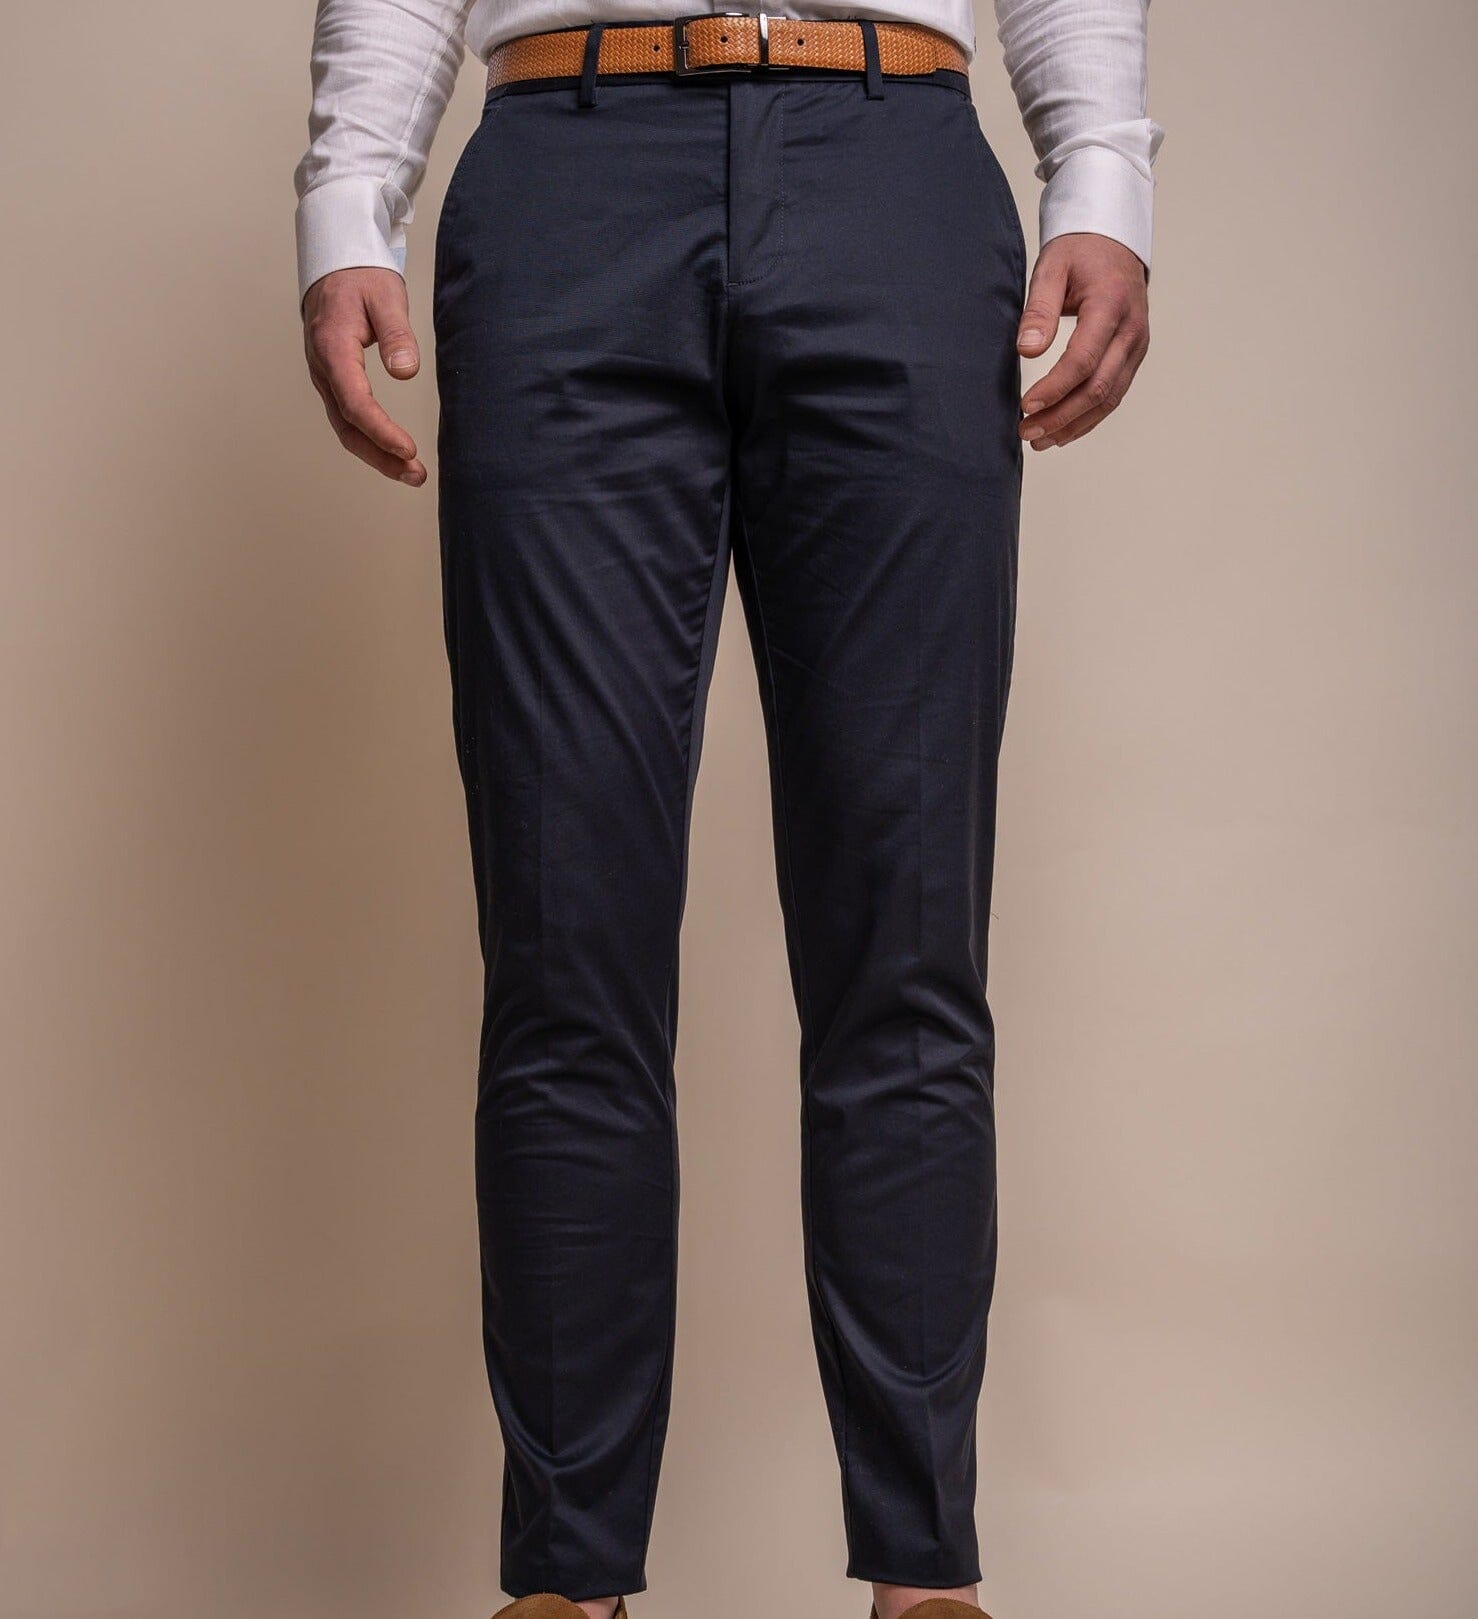 Mario Navy Cotton Trousers - Trousers - 28R - THREADPEPPER